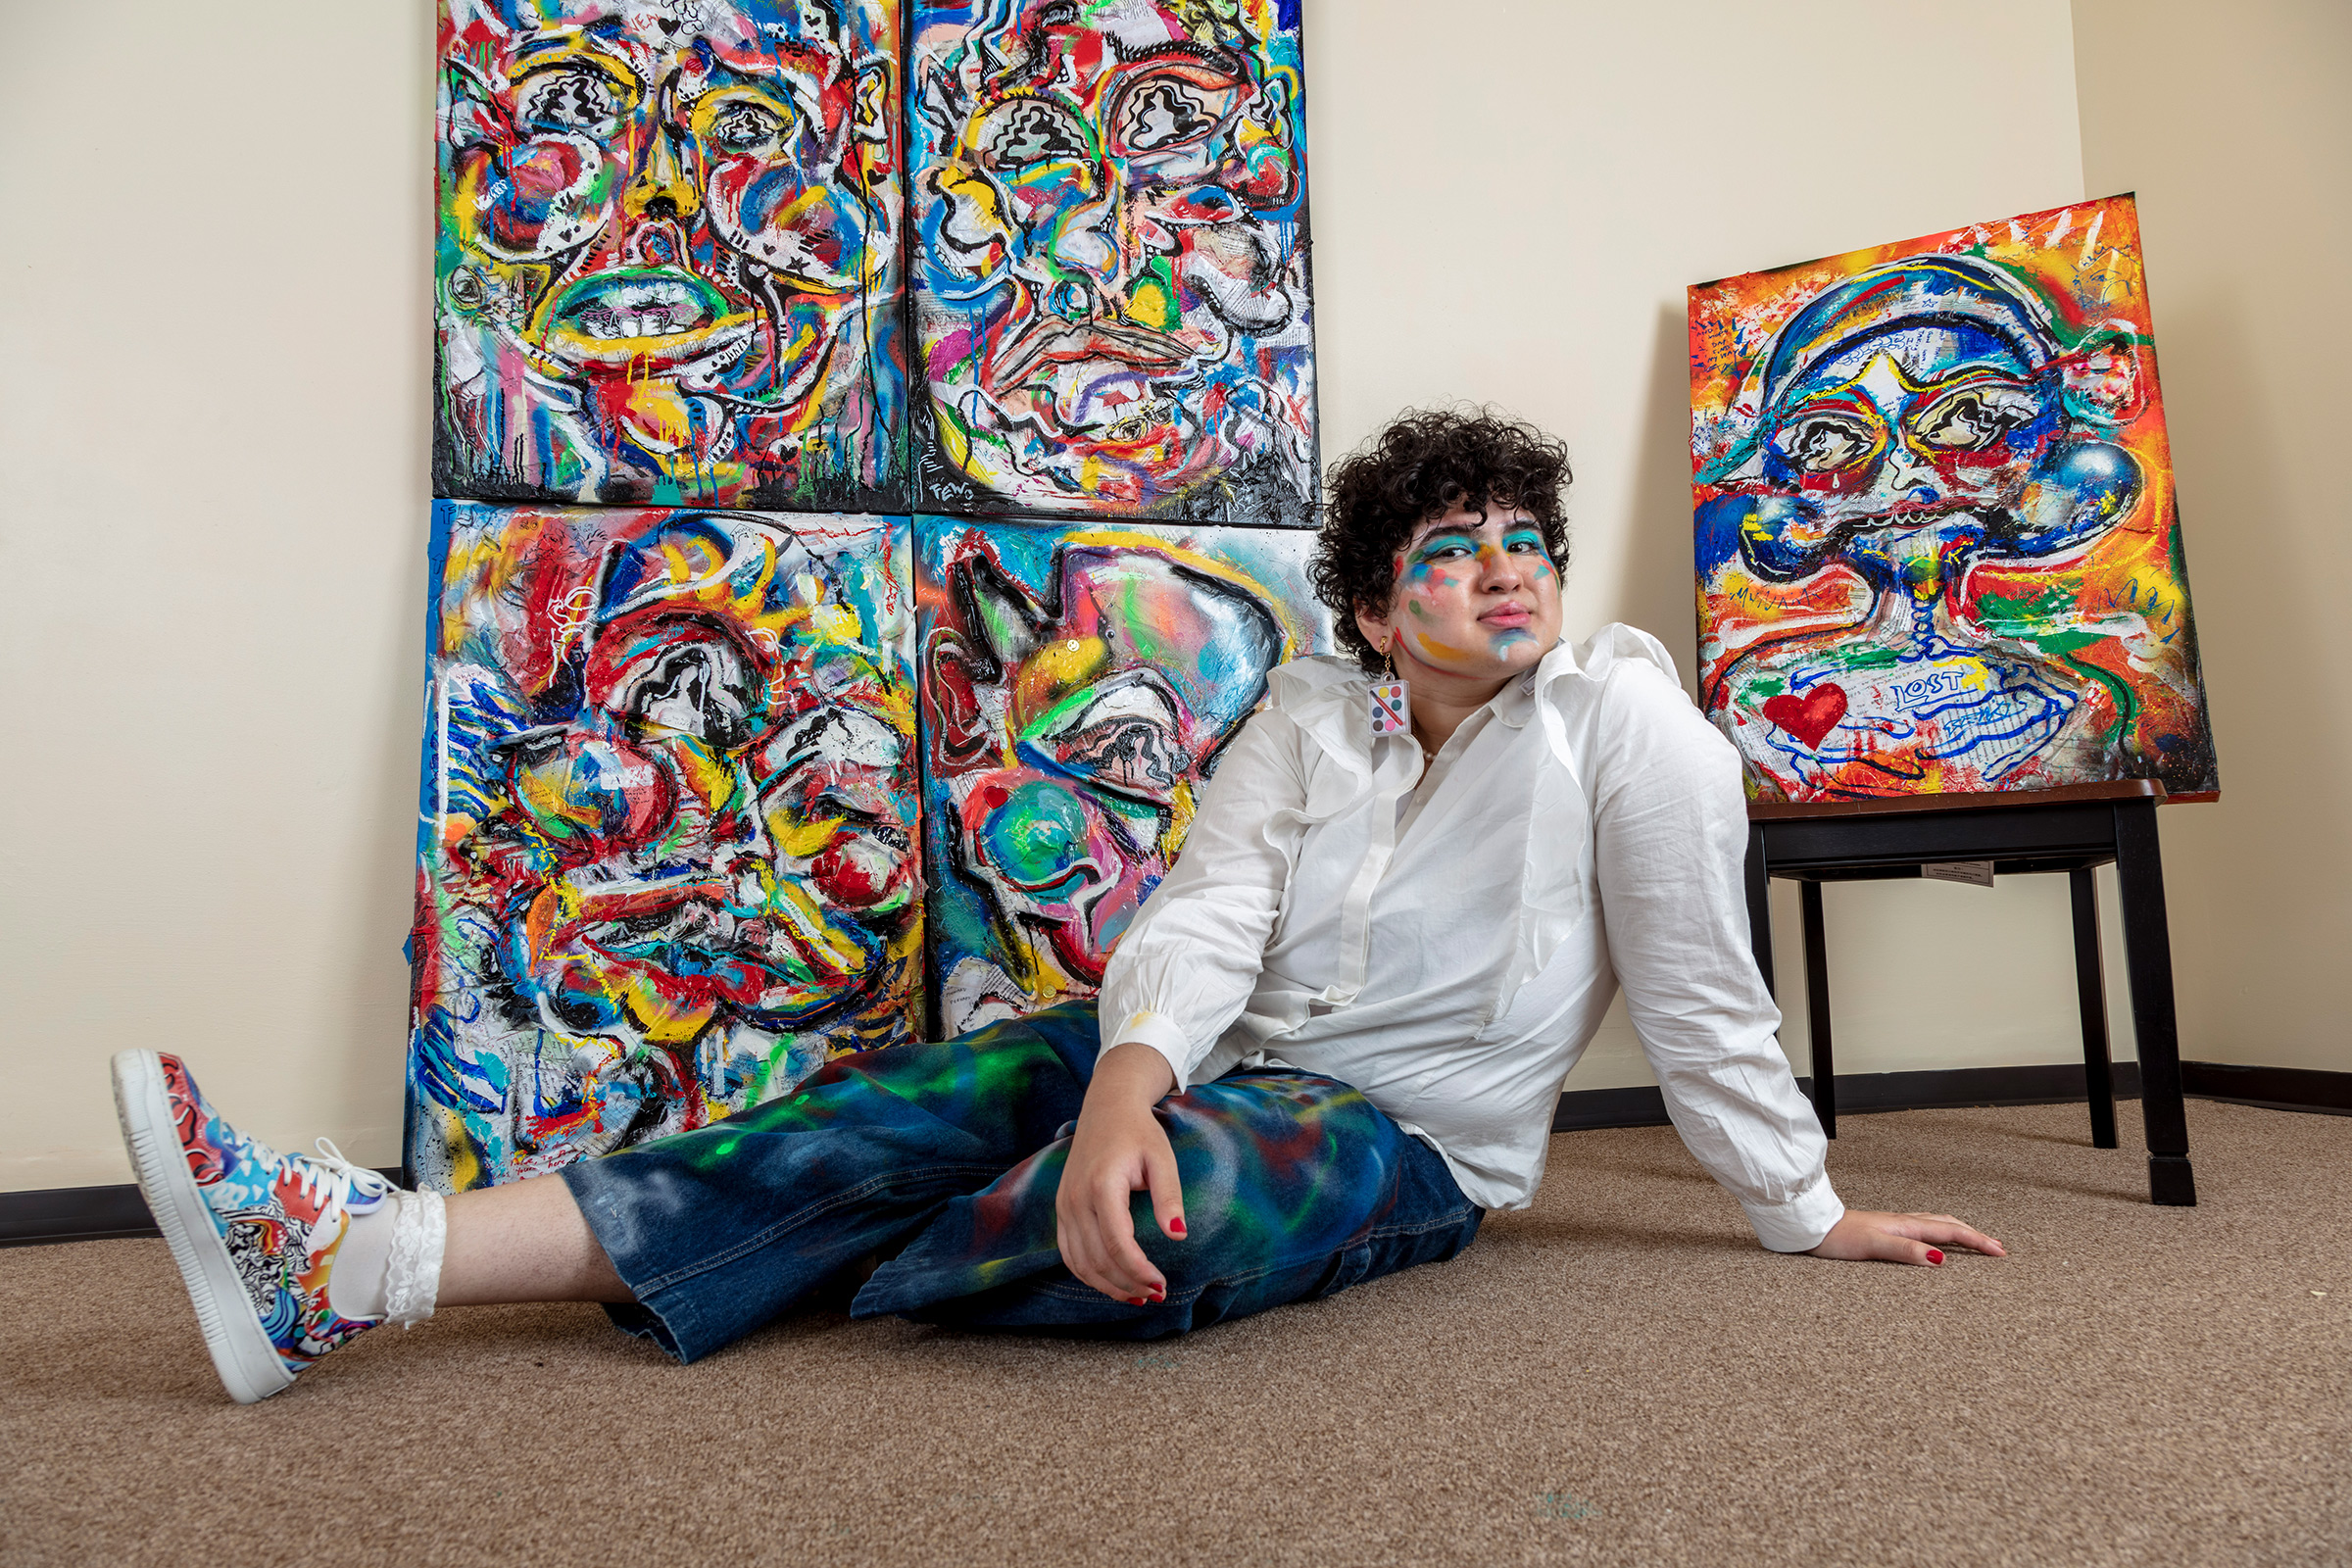 Teen Artists Are Making Millions on NFTs. Why—and How? | Time